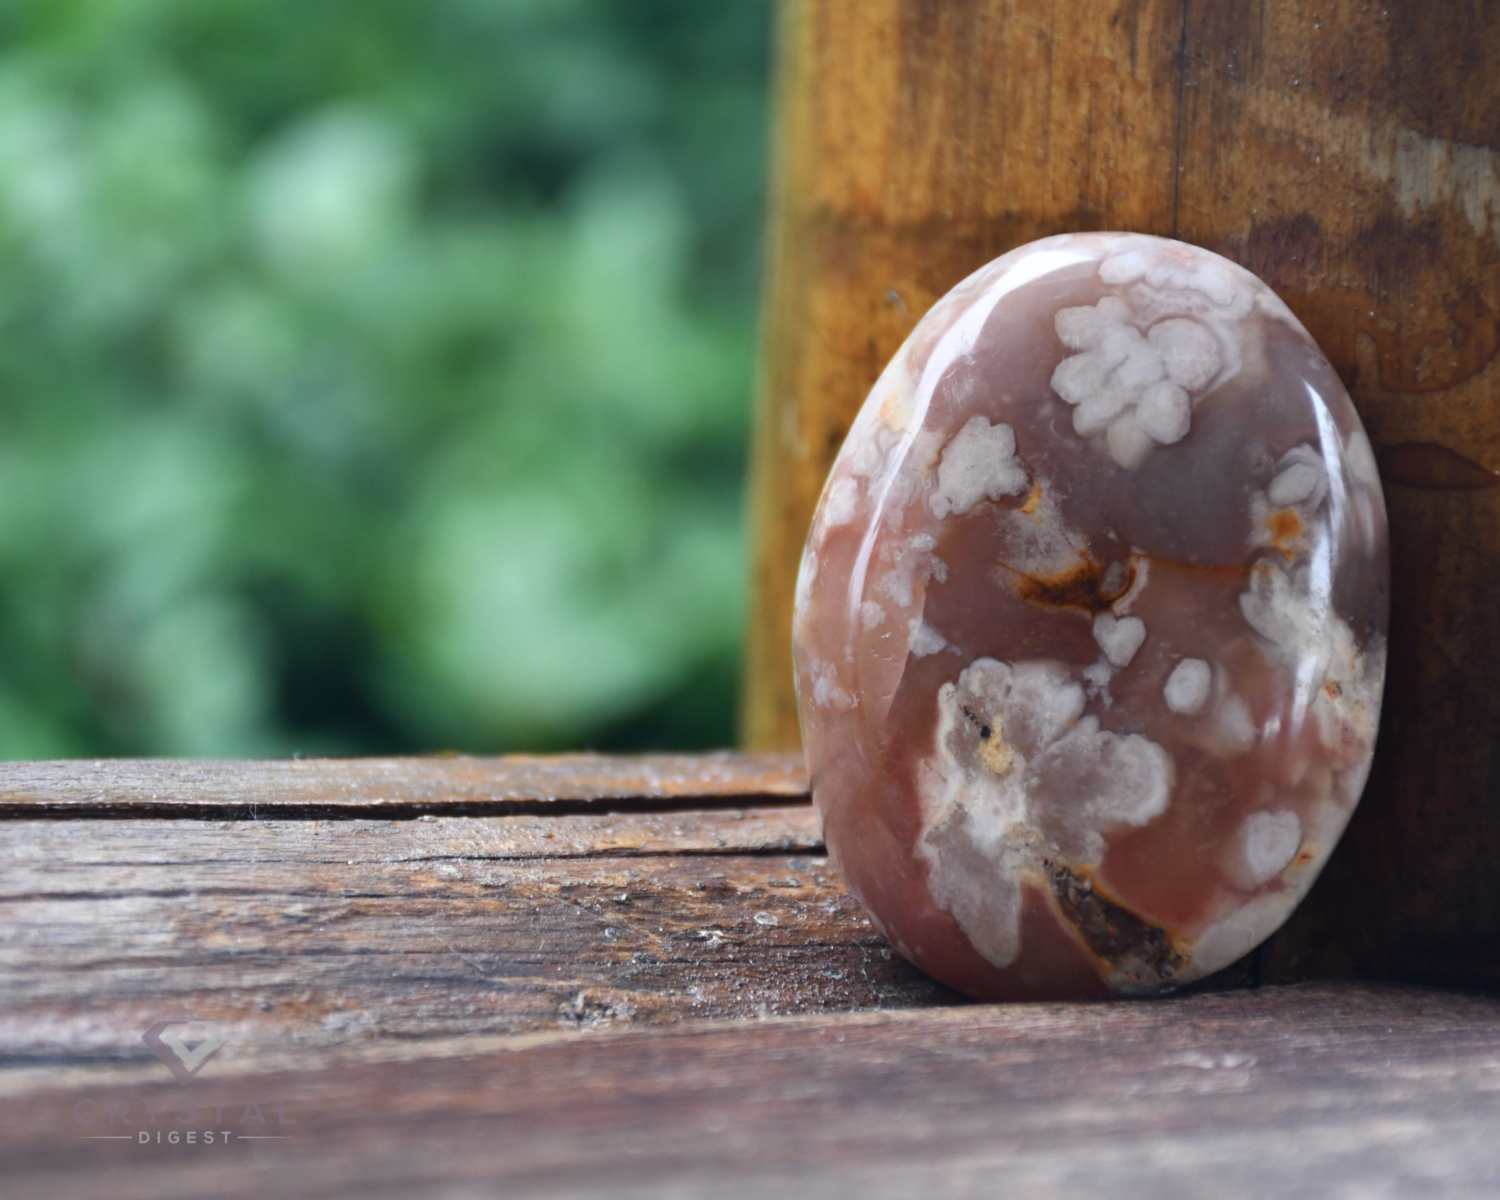 Flower agate crystal on a wooden window sill